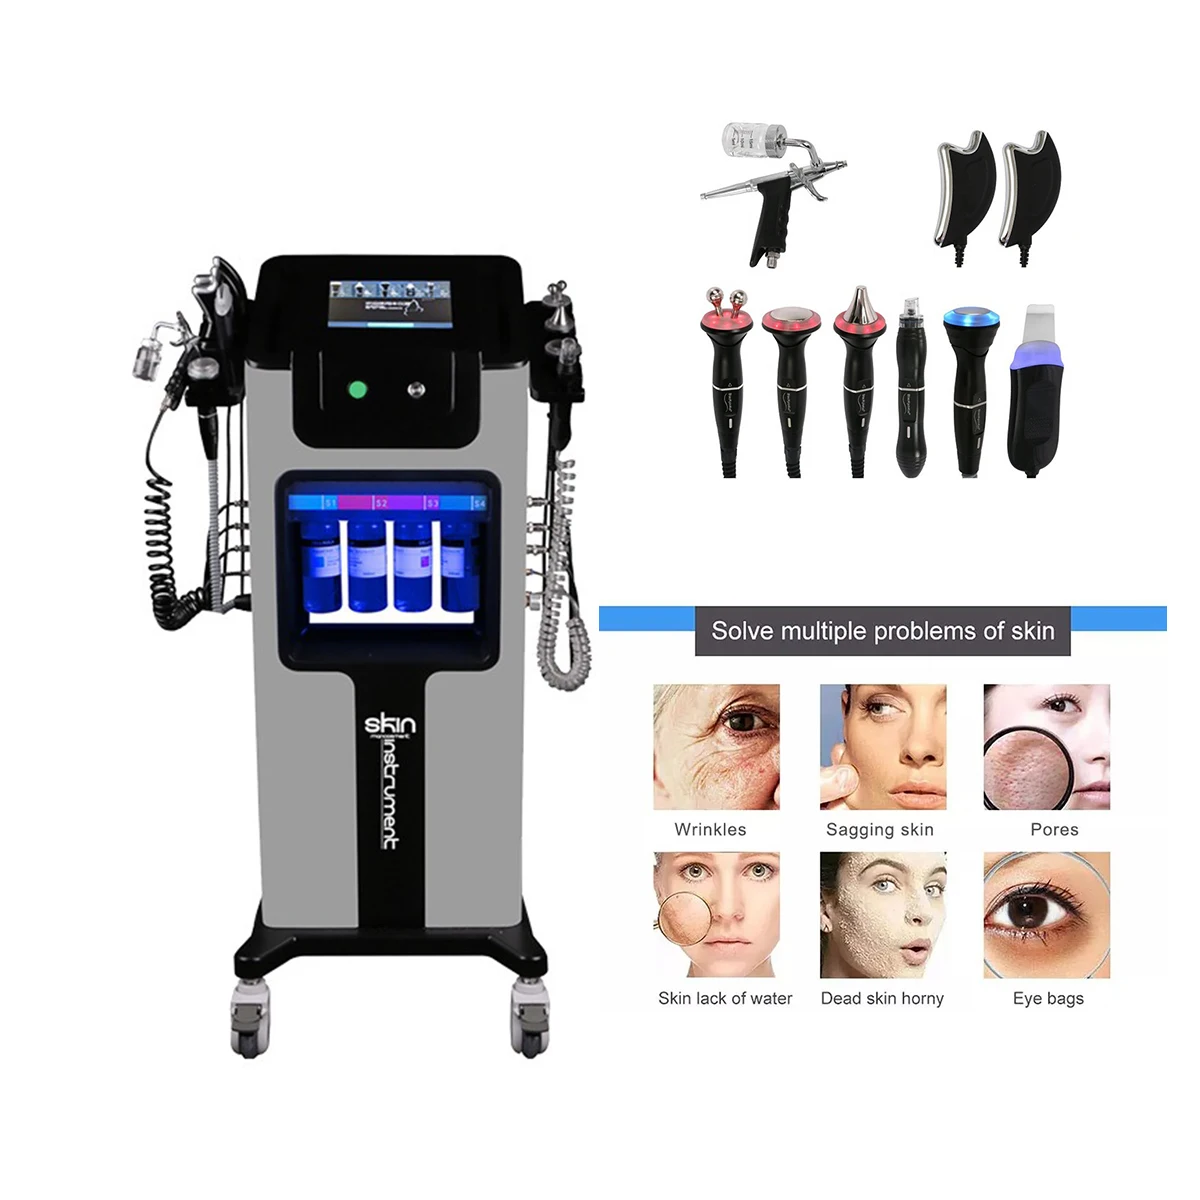 Professional 8 in1 Skin Scrubber Microdermoabrasion Facial/Hydra Dermabrasion Beauty Machine